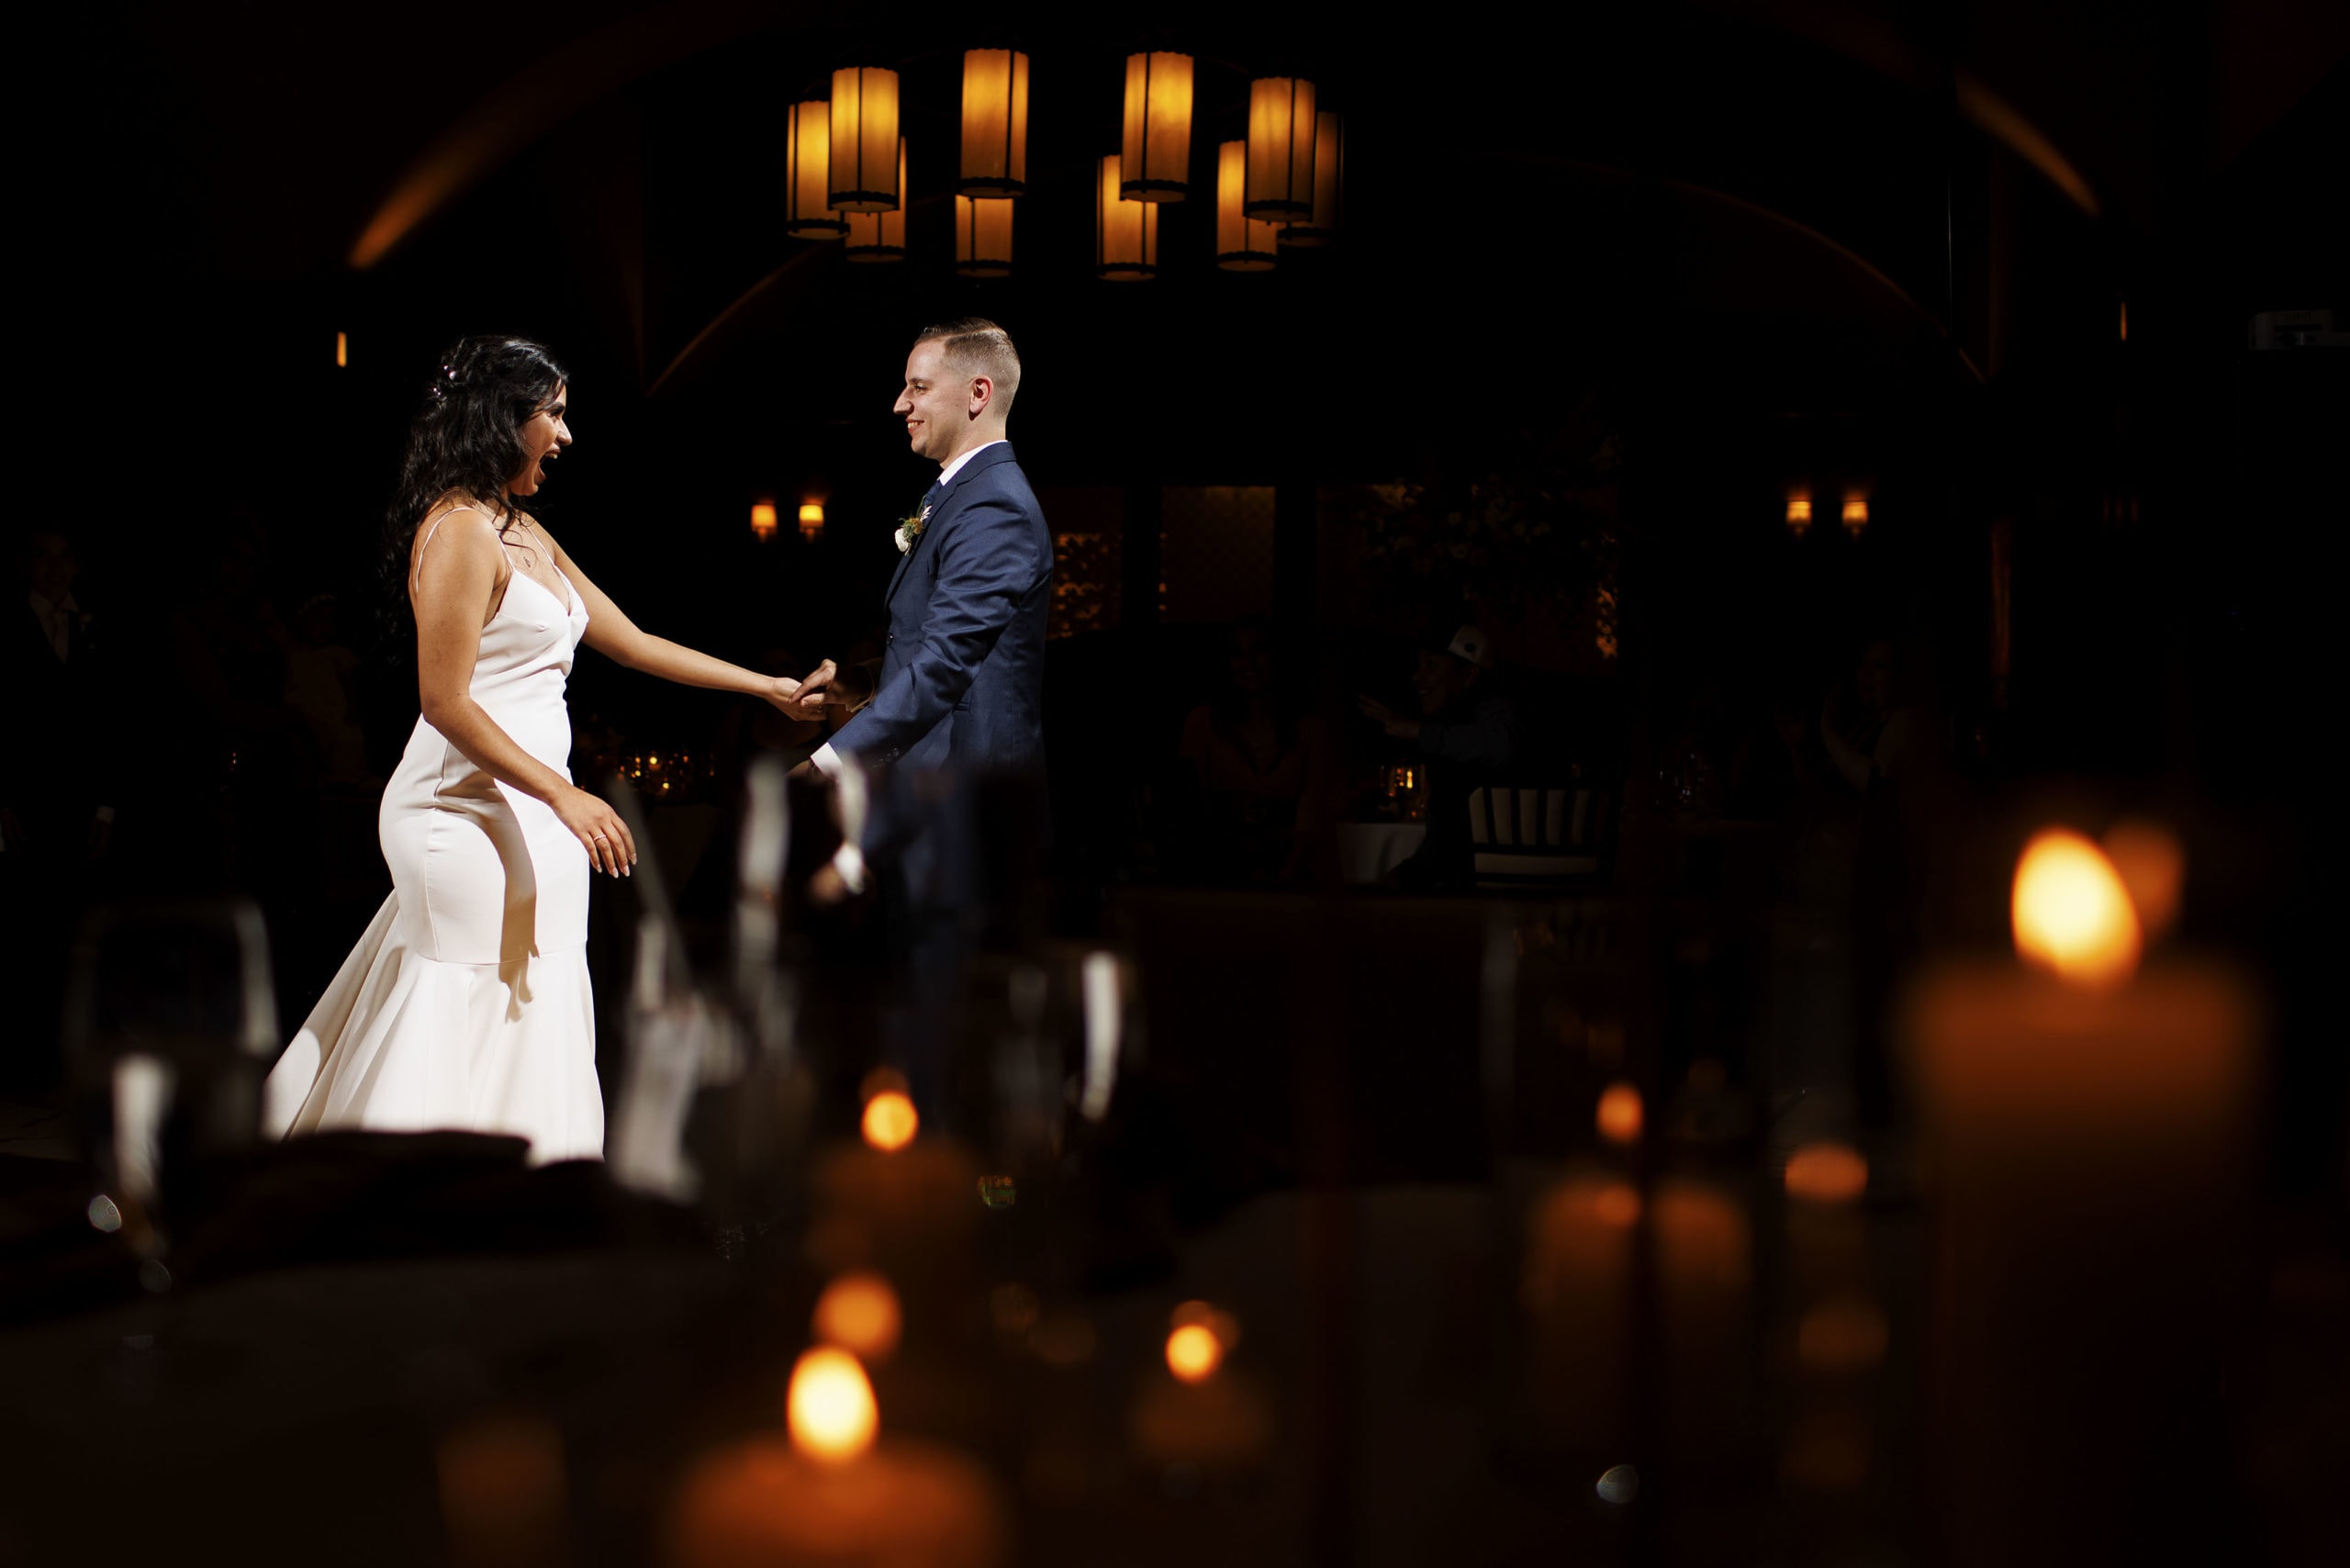 The newlyweds share their first dance at Flame Restaurant in Vail